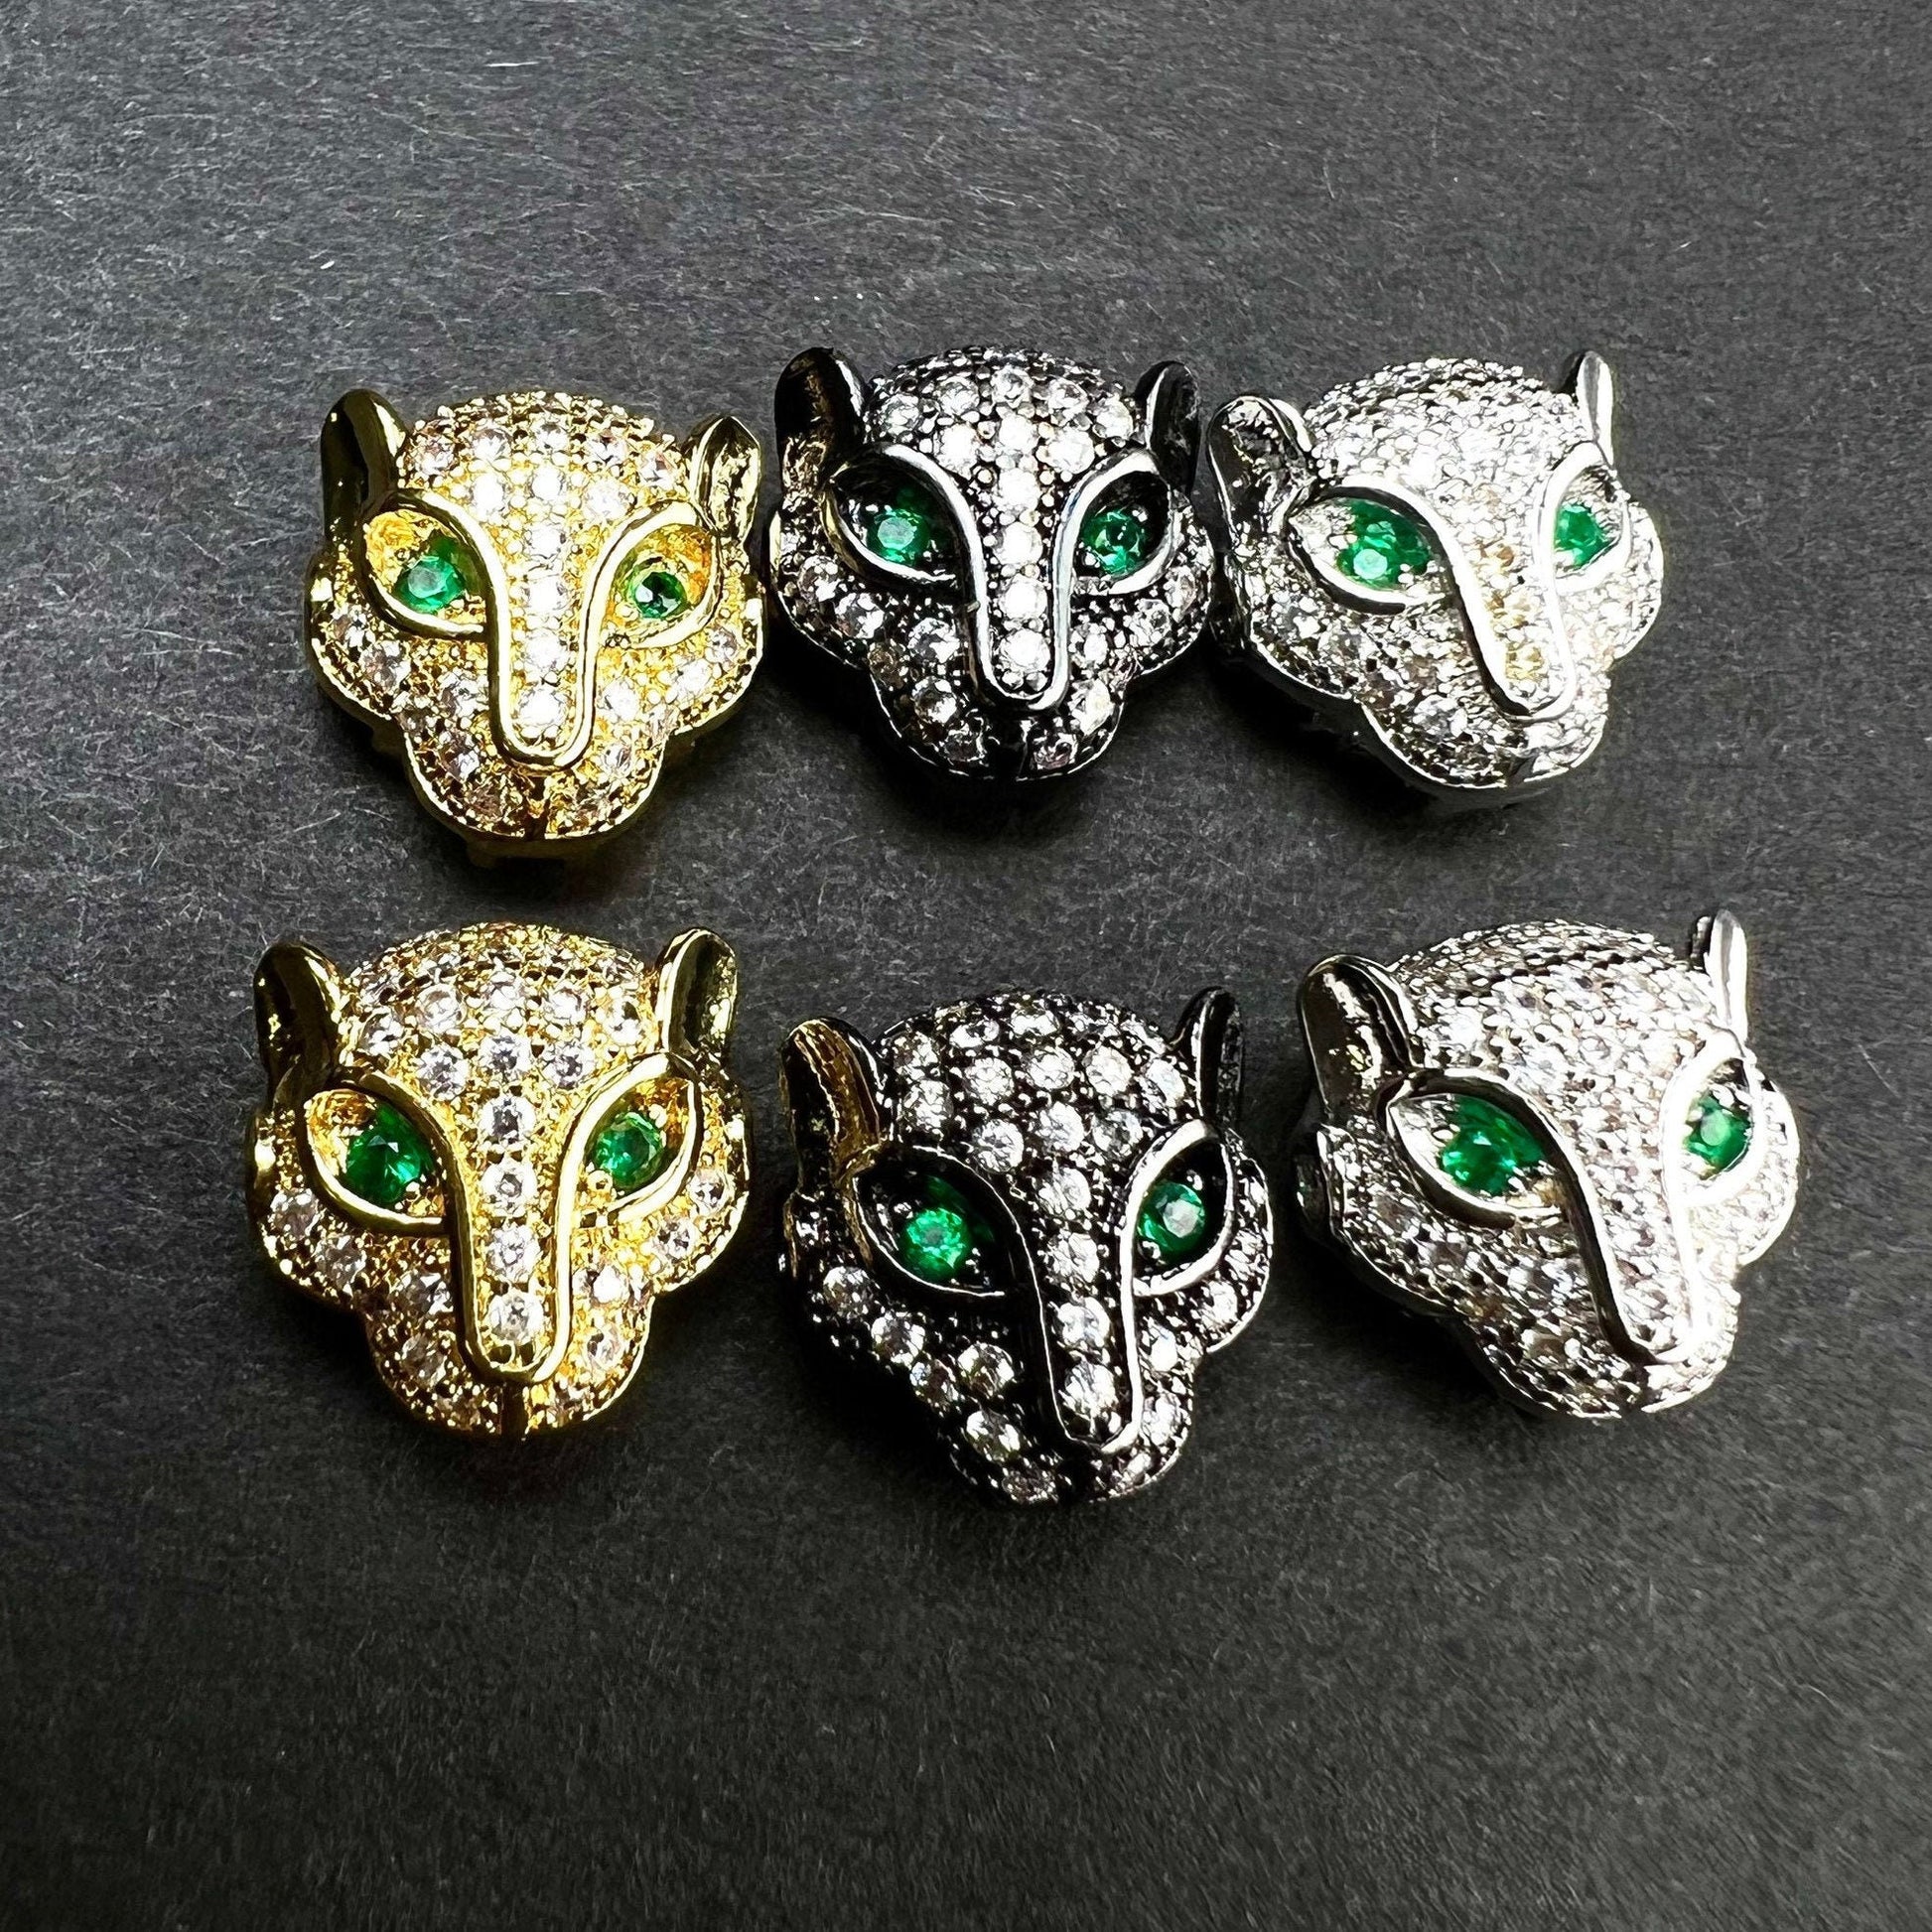 CZ Leopard micro pave diamond style spacer Bead high quality 11x11 mm cubic Zirconia leopard emerald eye for jewelry making charm bead